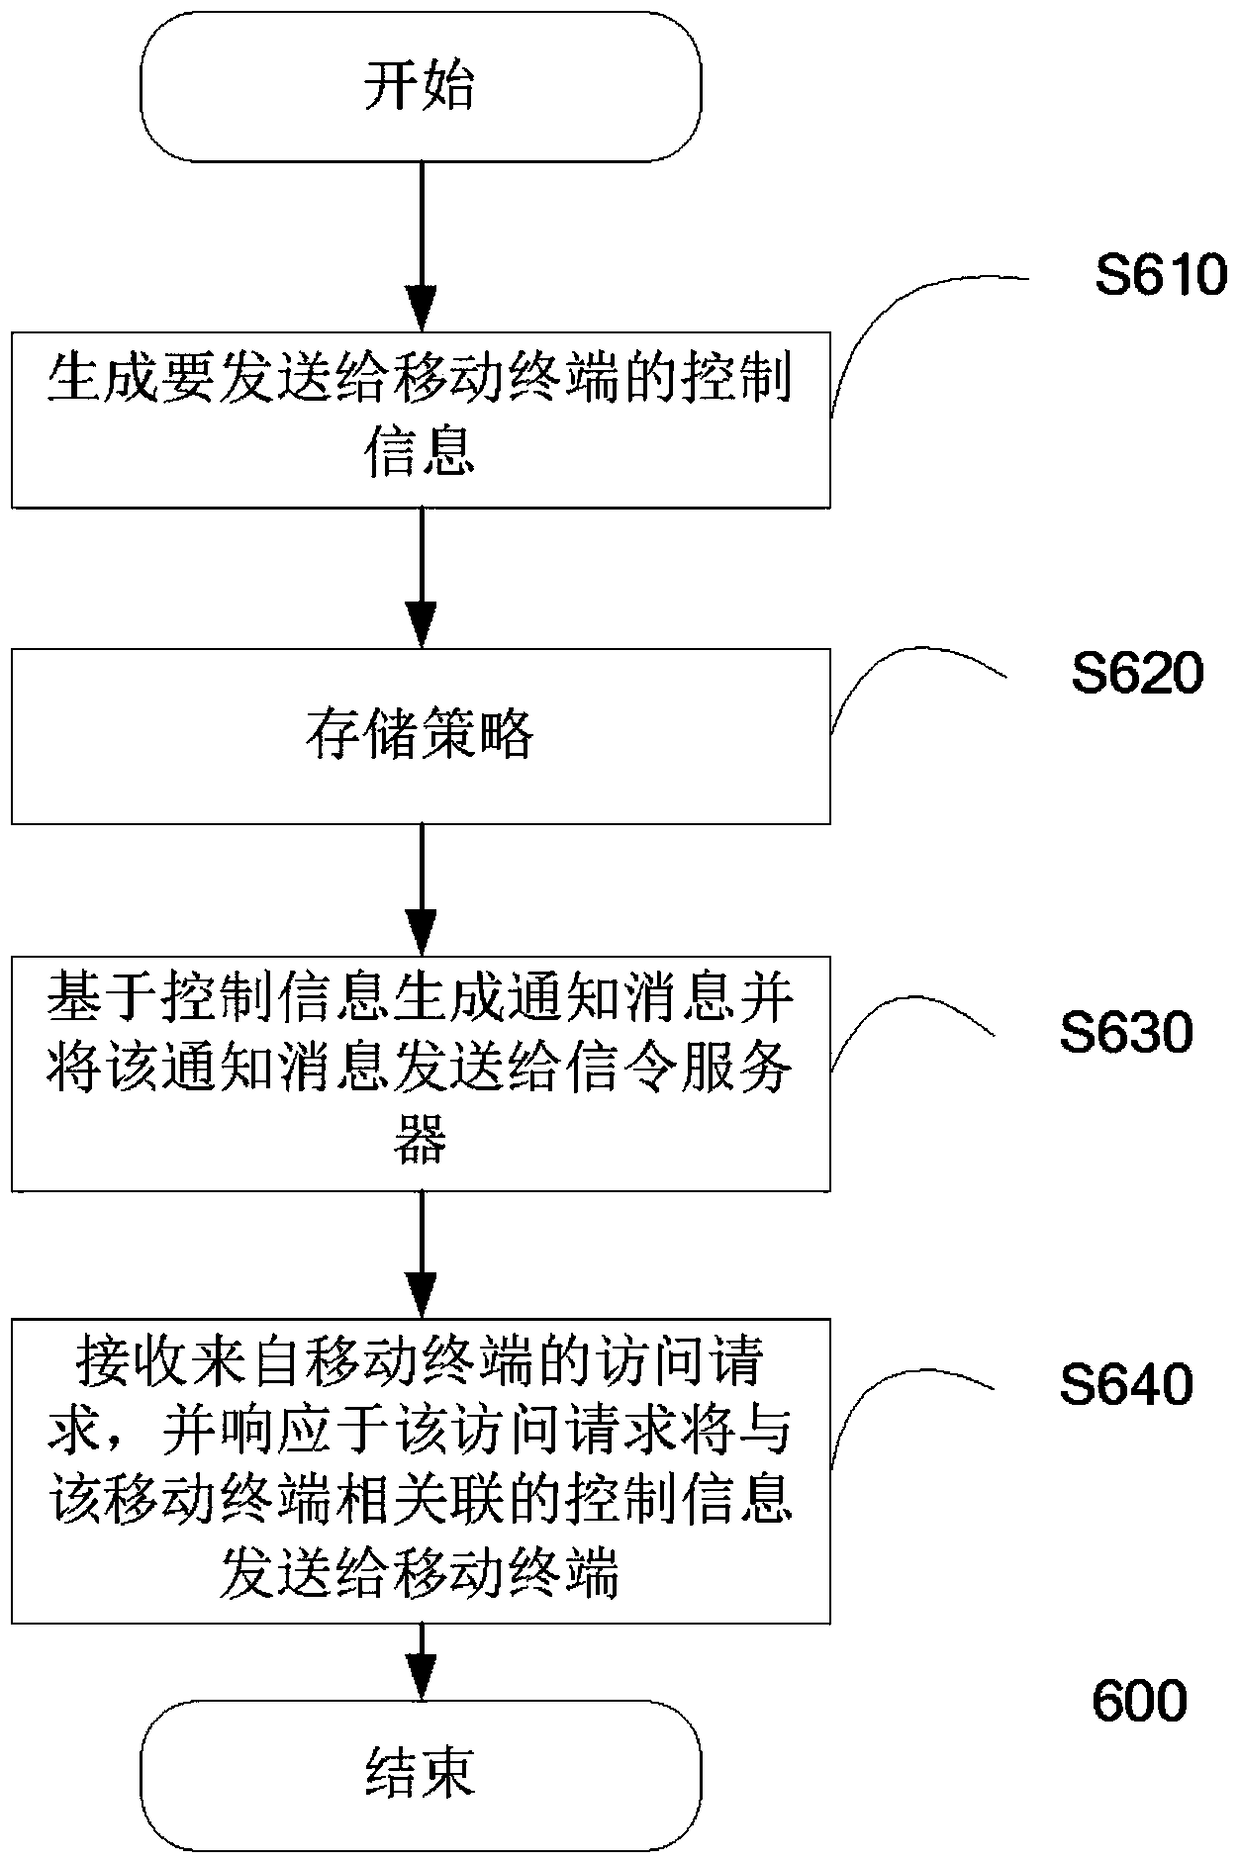 A mobile terminal management system and management method